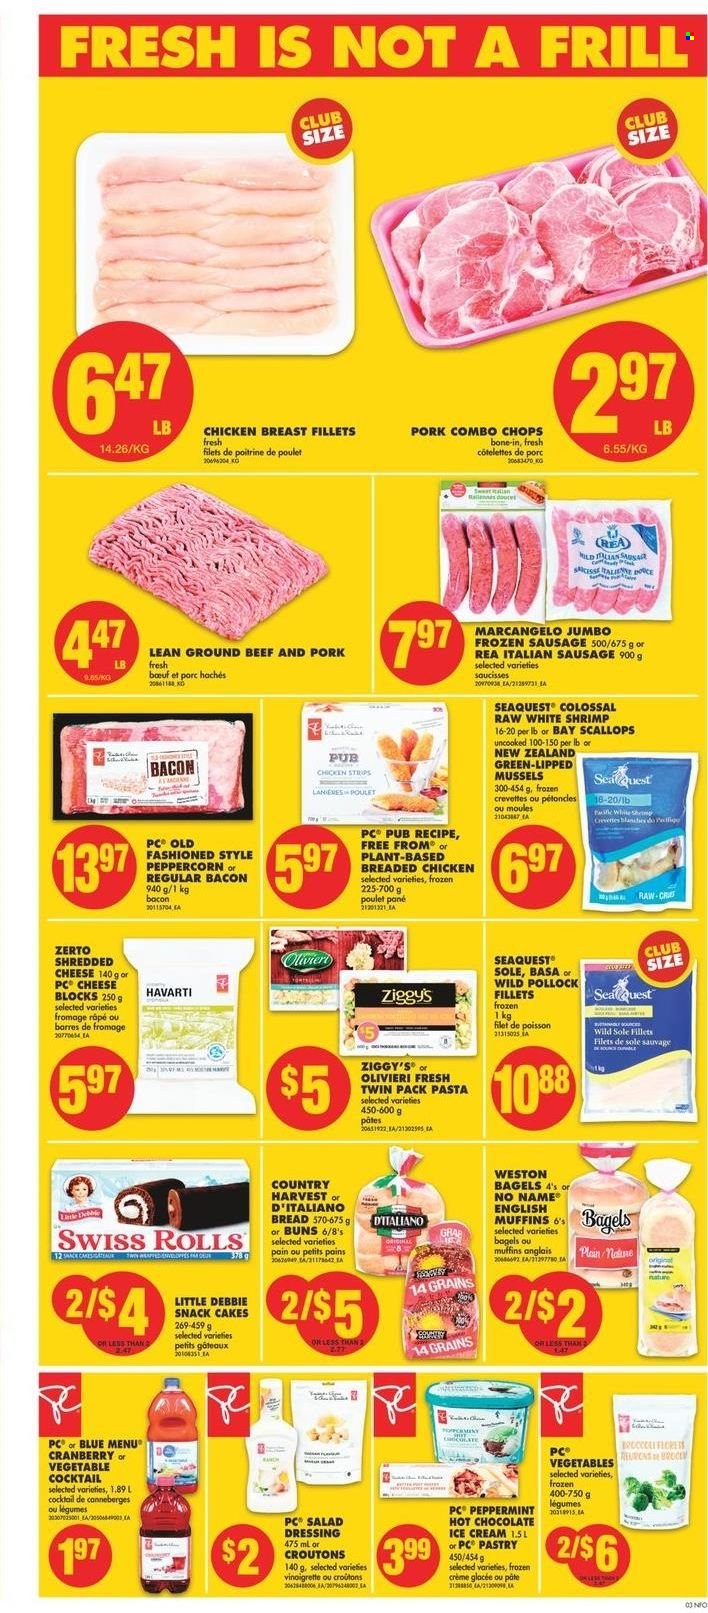 thumbnail - No Frills Flyer - November 11, 2021 - November 17, 2021 - Sales products - bagels, bread, english muffins, cake, buns, mussels, scallops, pollock, shrimps, No Name, pasta, fried chicken, bacon, sausage, italian sausage, shredded cheese, Havarti, ice cream, Country Harvest, snack, croutons, salad dressing, dressing, hot chocolate, chicken, beef meat, ground beef. Page 4.